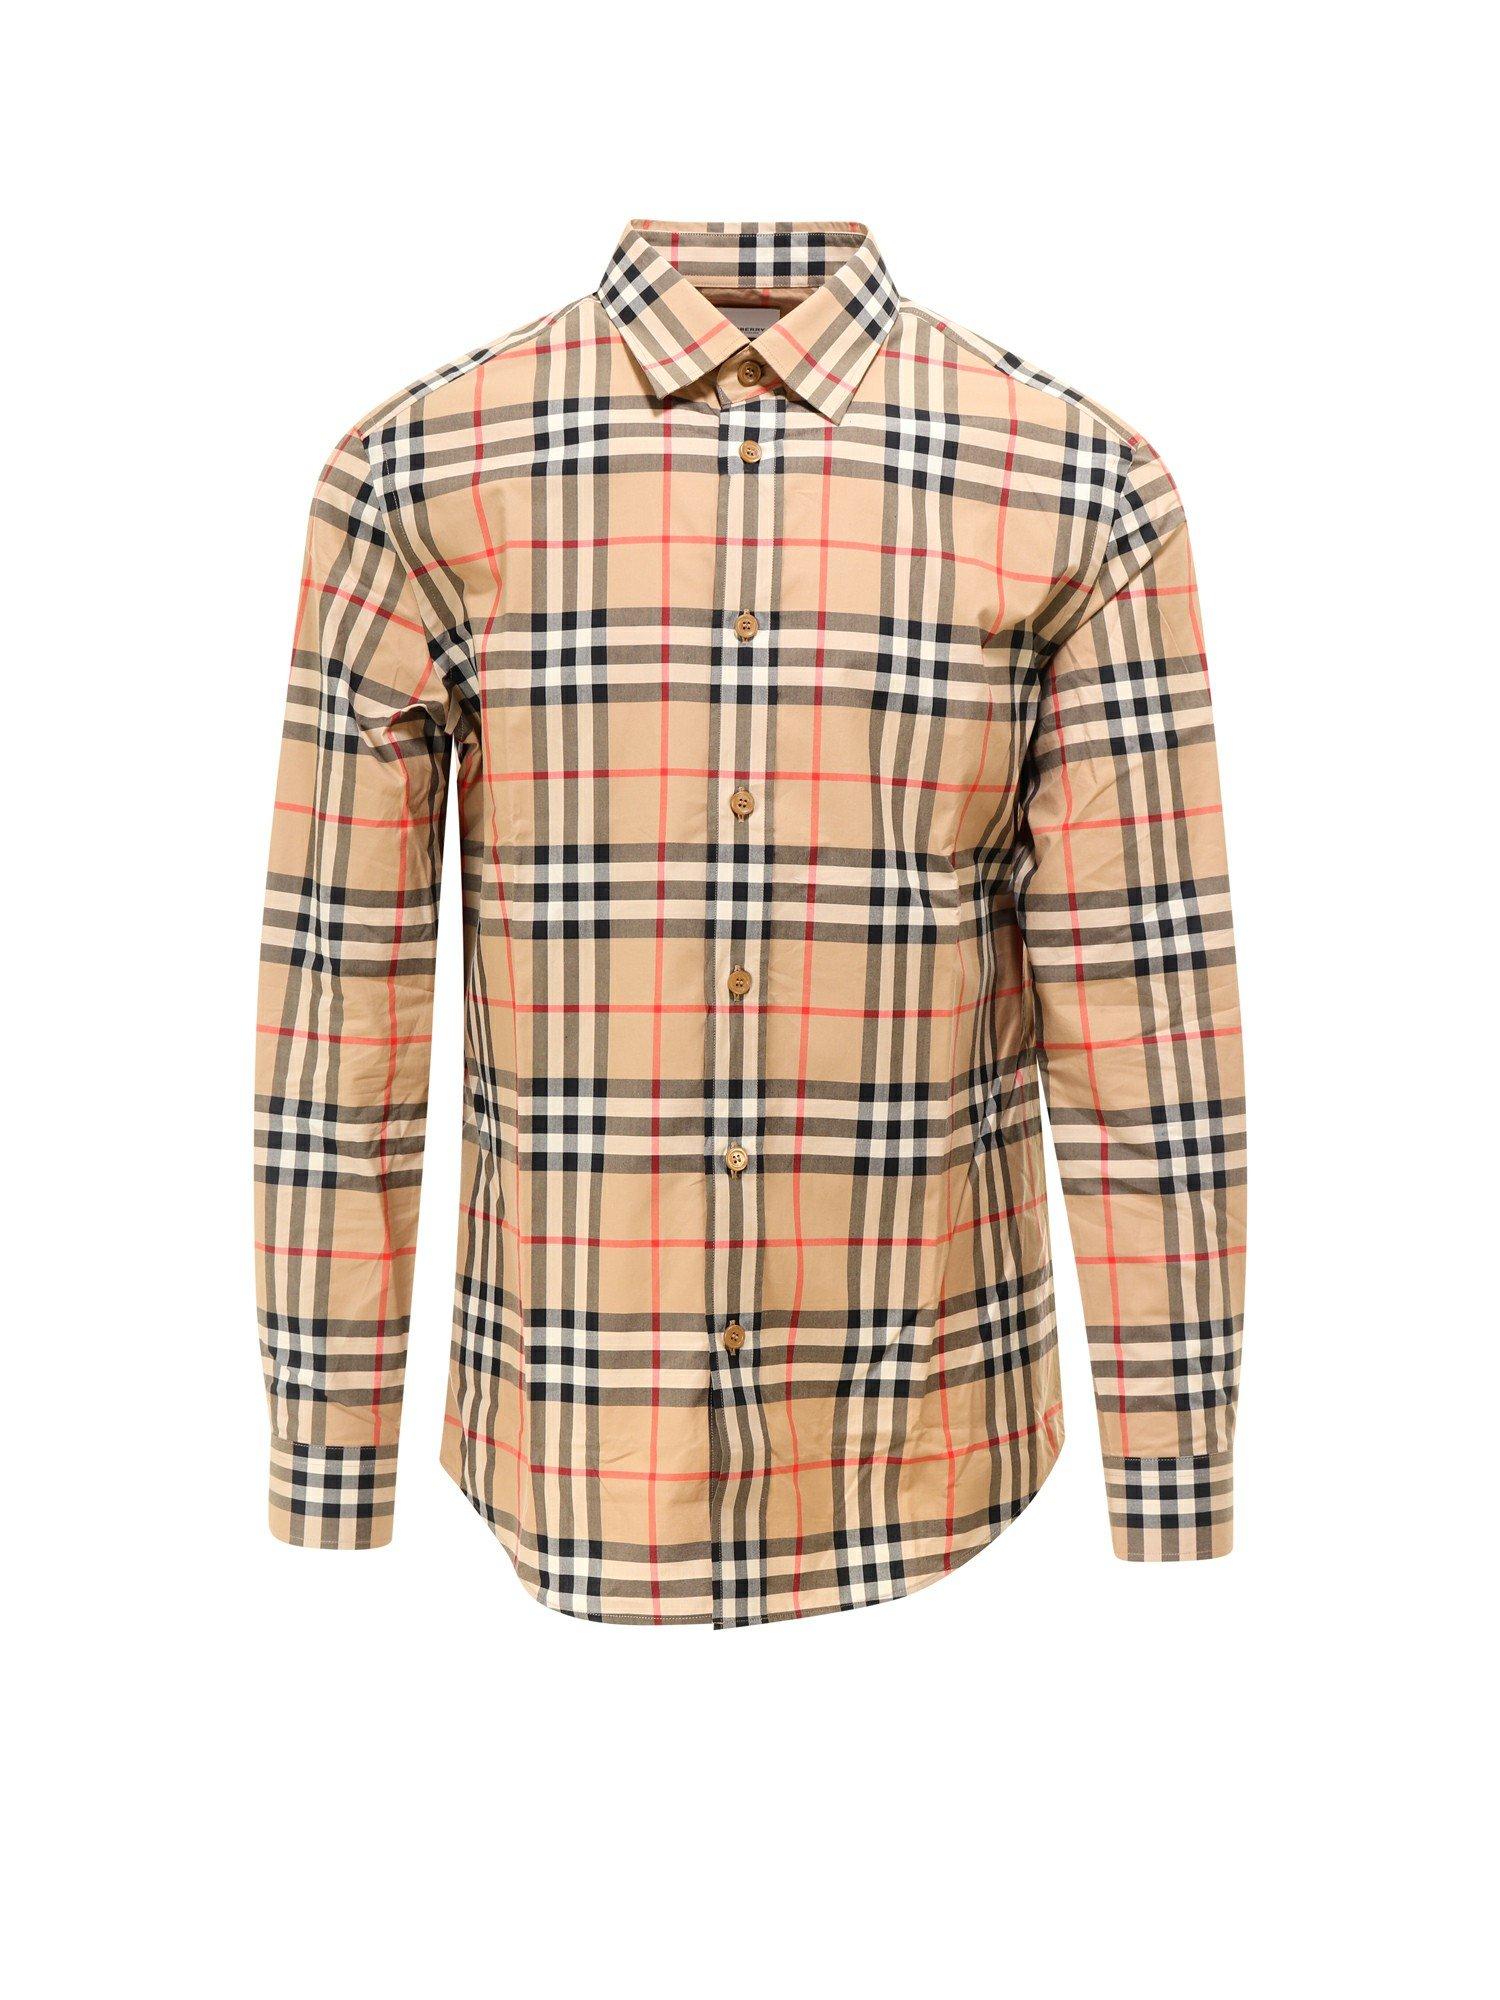 Burberry Check Pattern Shirt for Men - Save 36% - Lyst